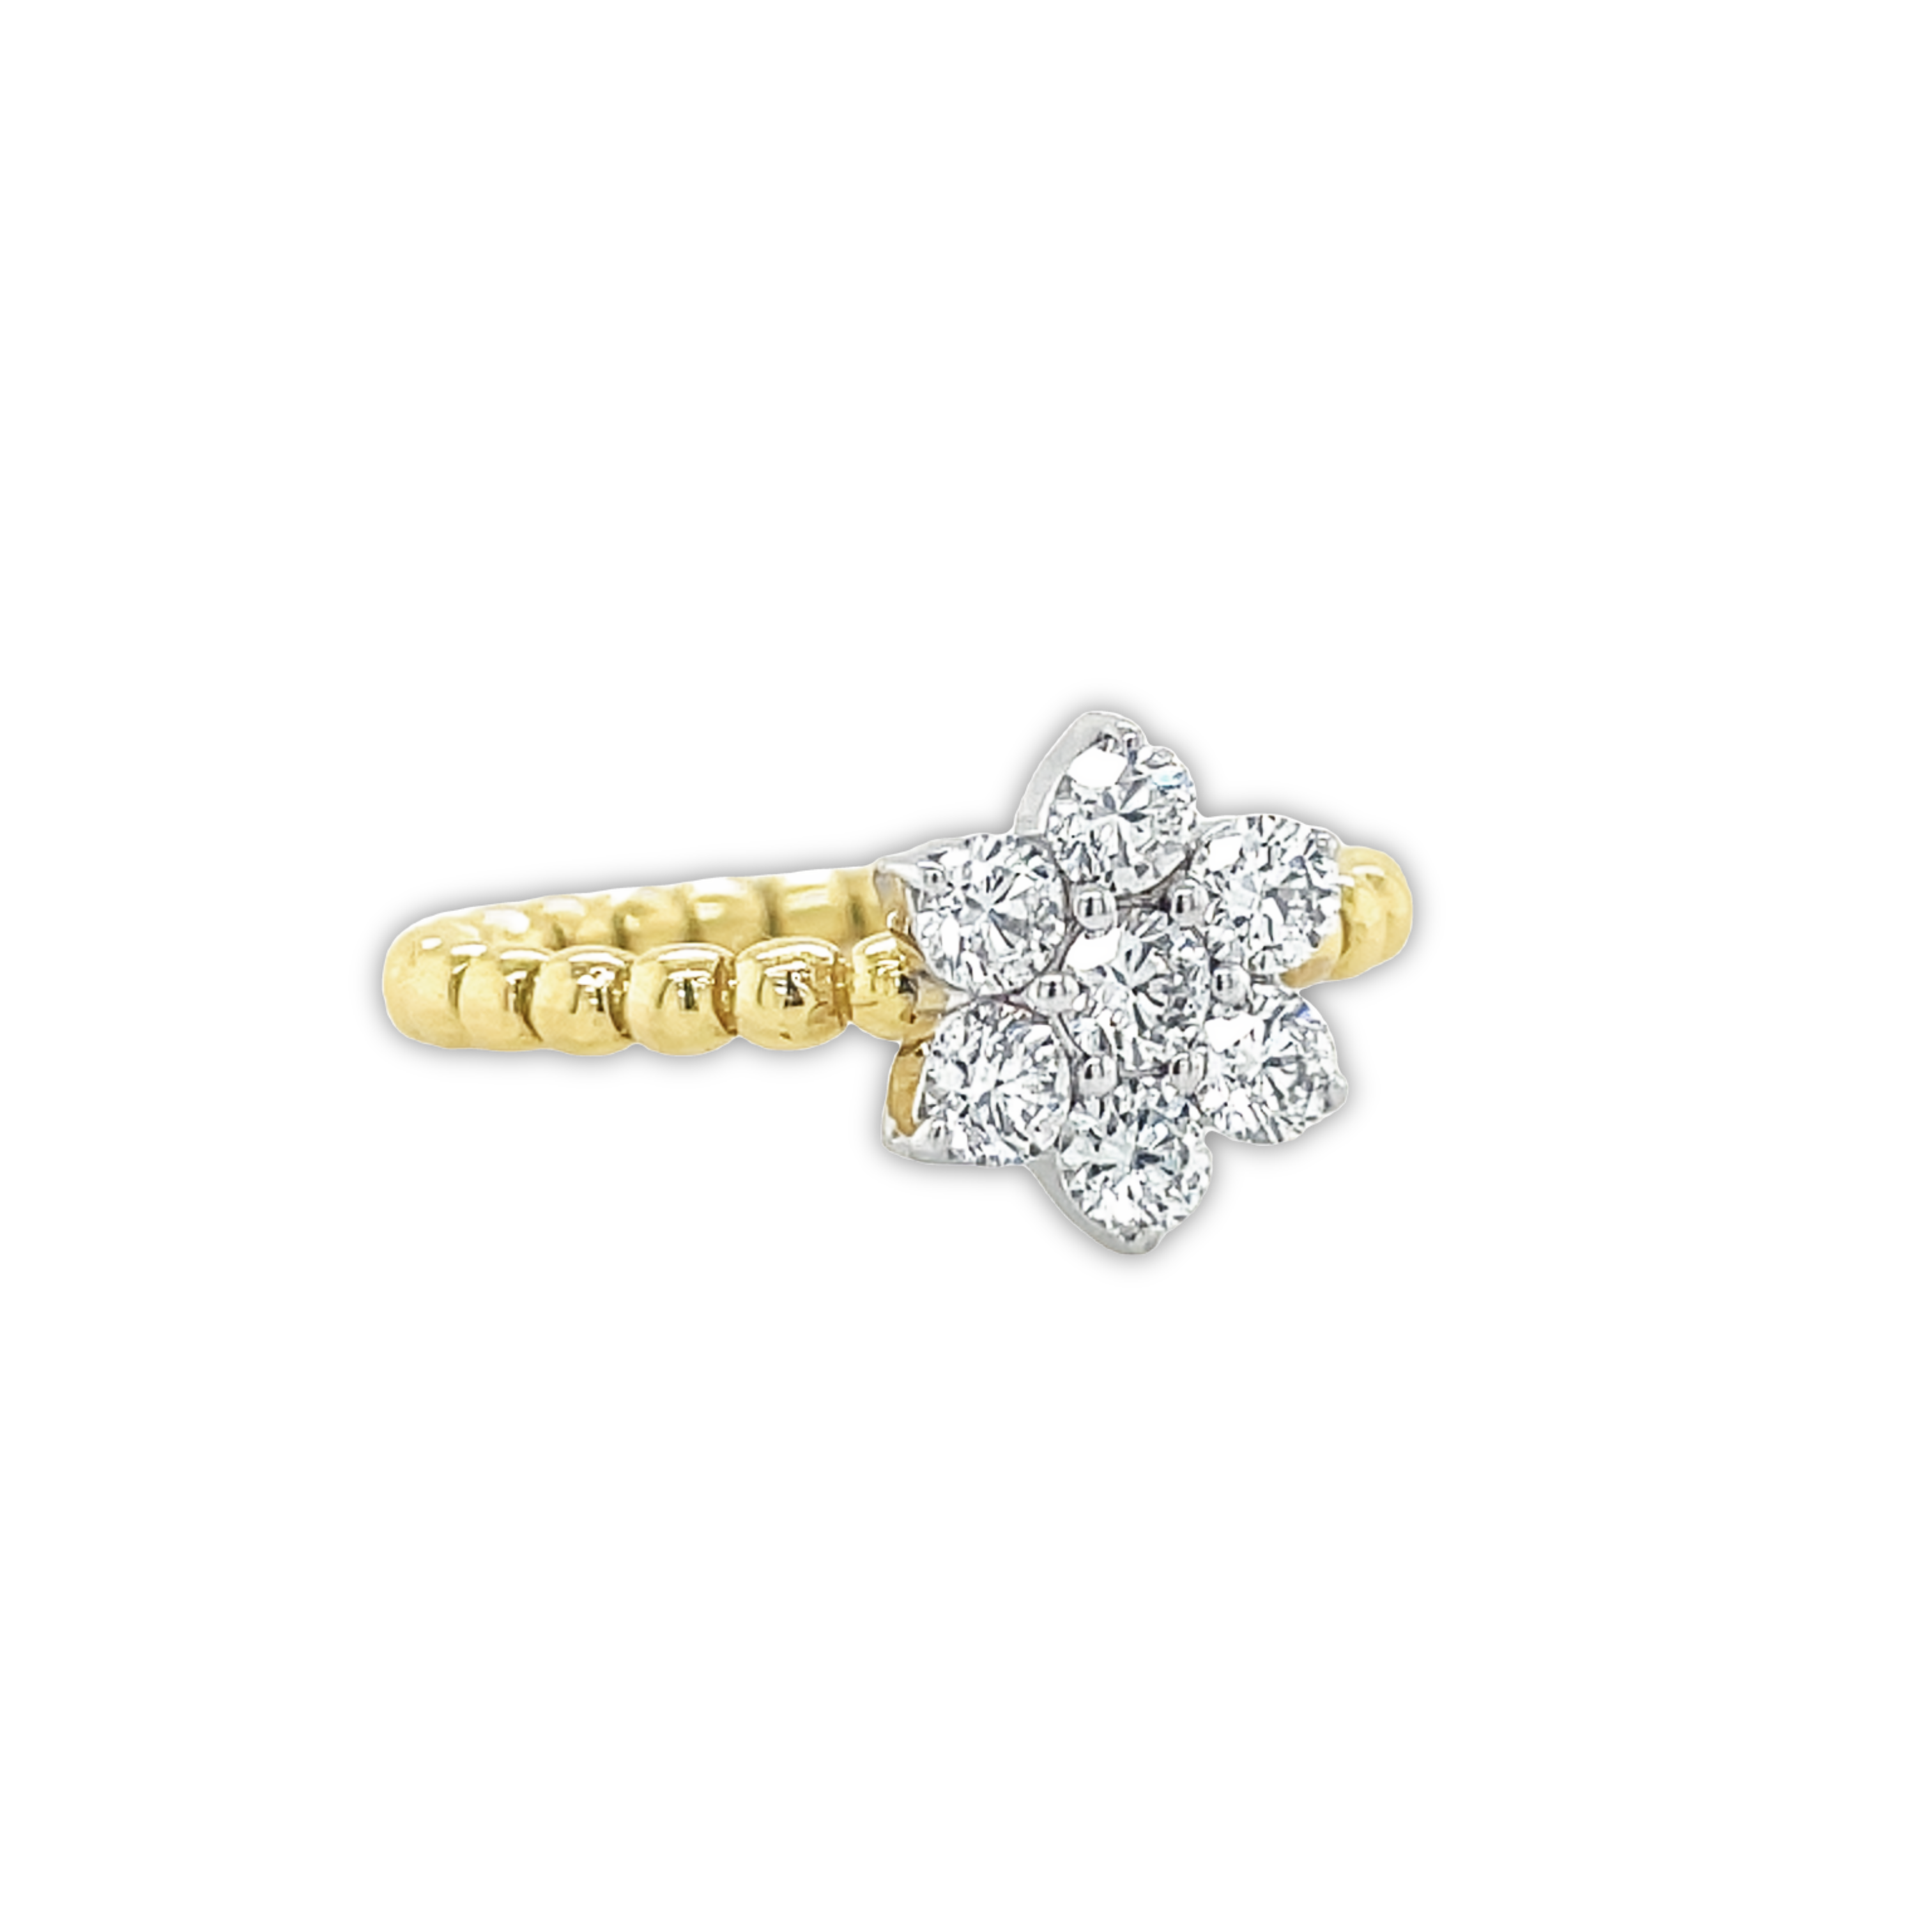 A breathtaking ring crafted with the 18K yellow and white gold and diamonds (0.71 cts). Adorned with an intricate flower motif, this ring is the perfect piece to add a dazzling, timeless touch to any outfit. Size 6.5, 10.50 mm.